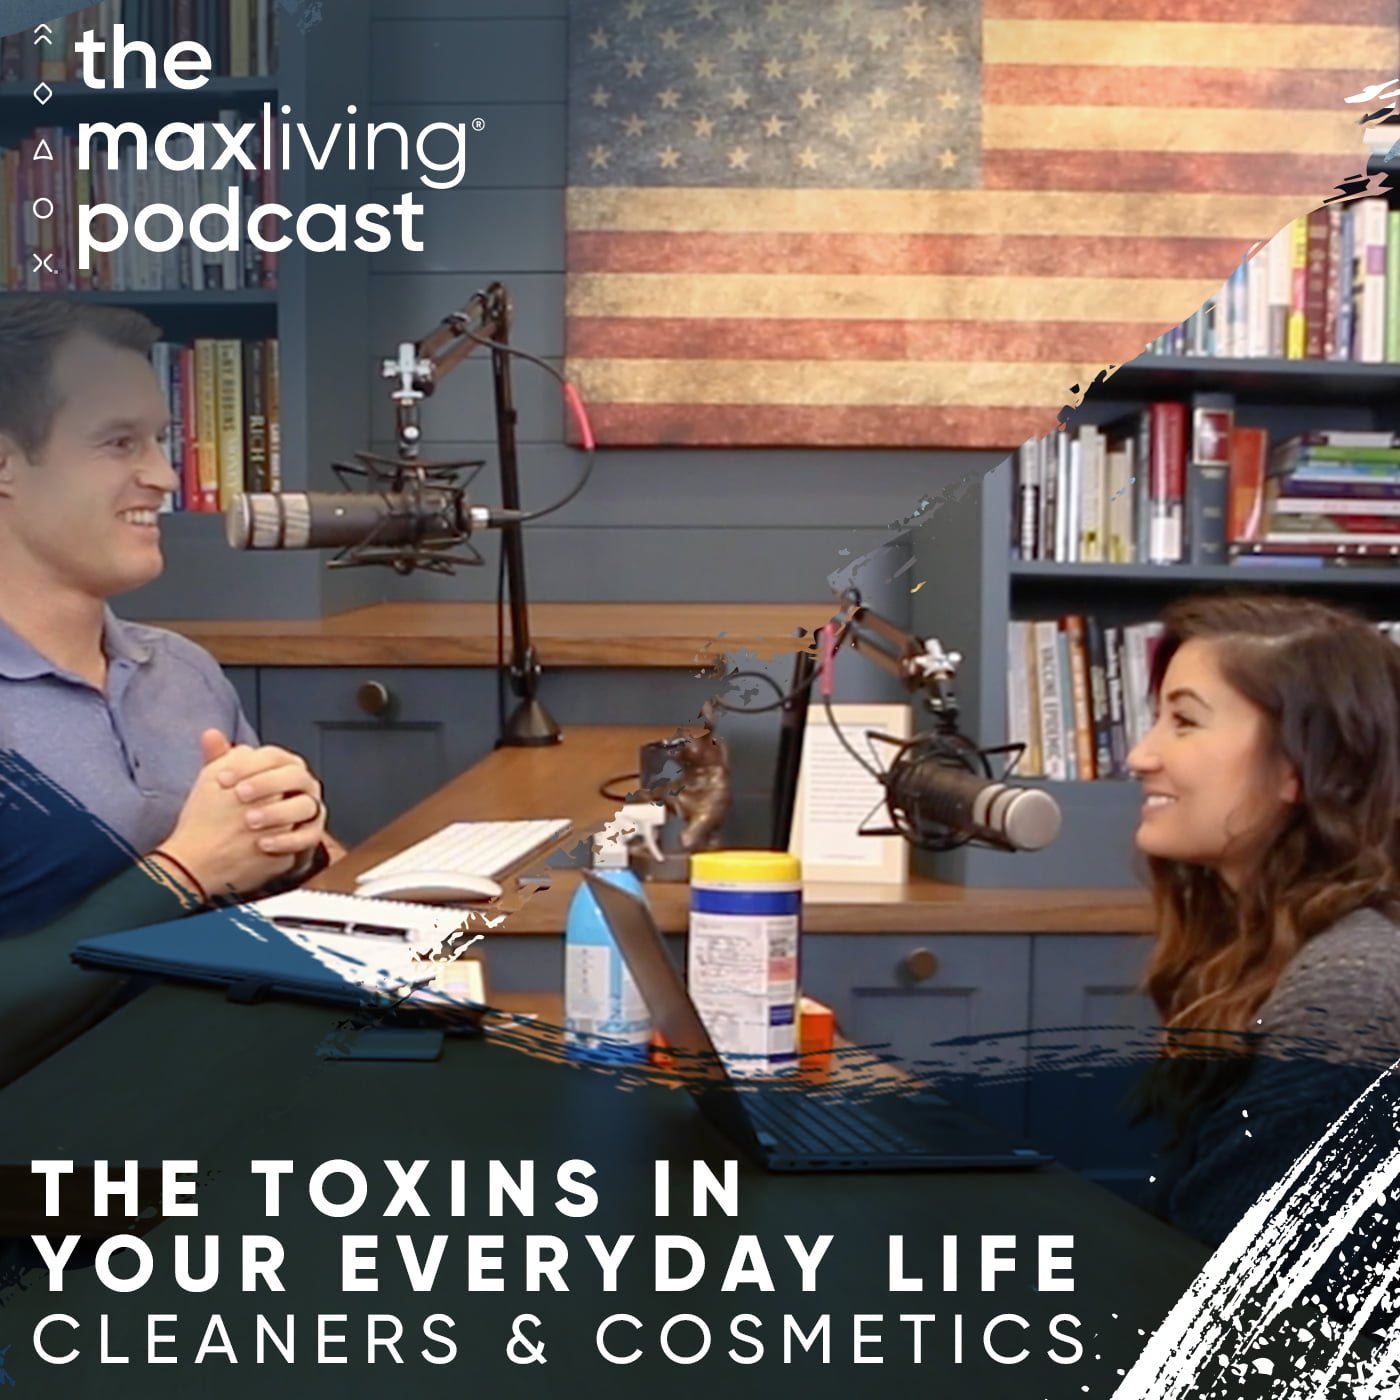 Episode 1 - The Toxins in Your Everyday Life: Cleaners and Cosmetics